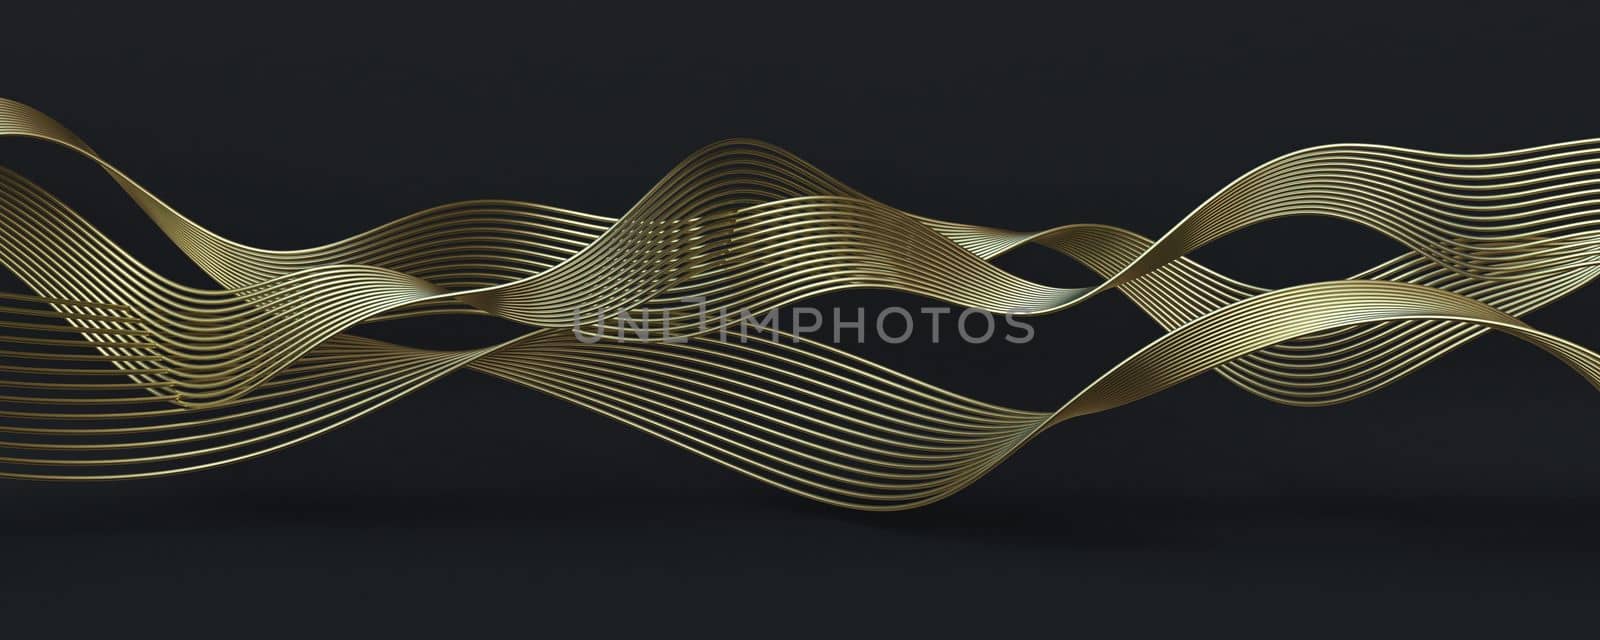 Golden wire abstract background 3D by djmilic